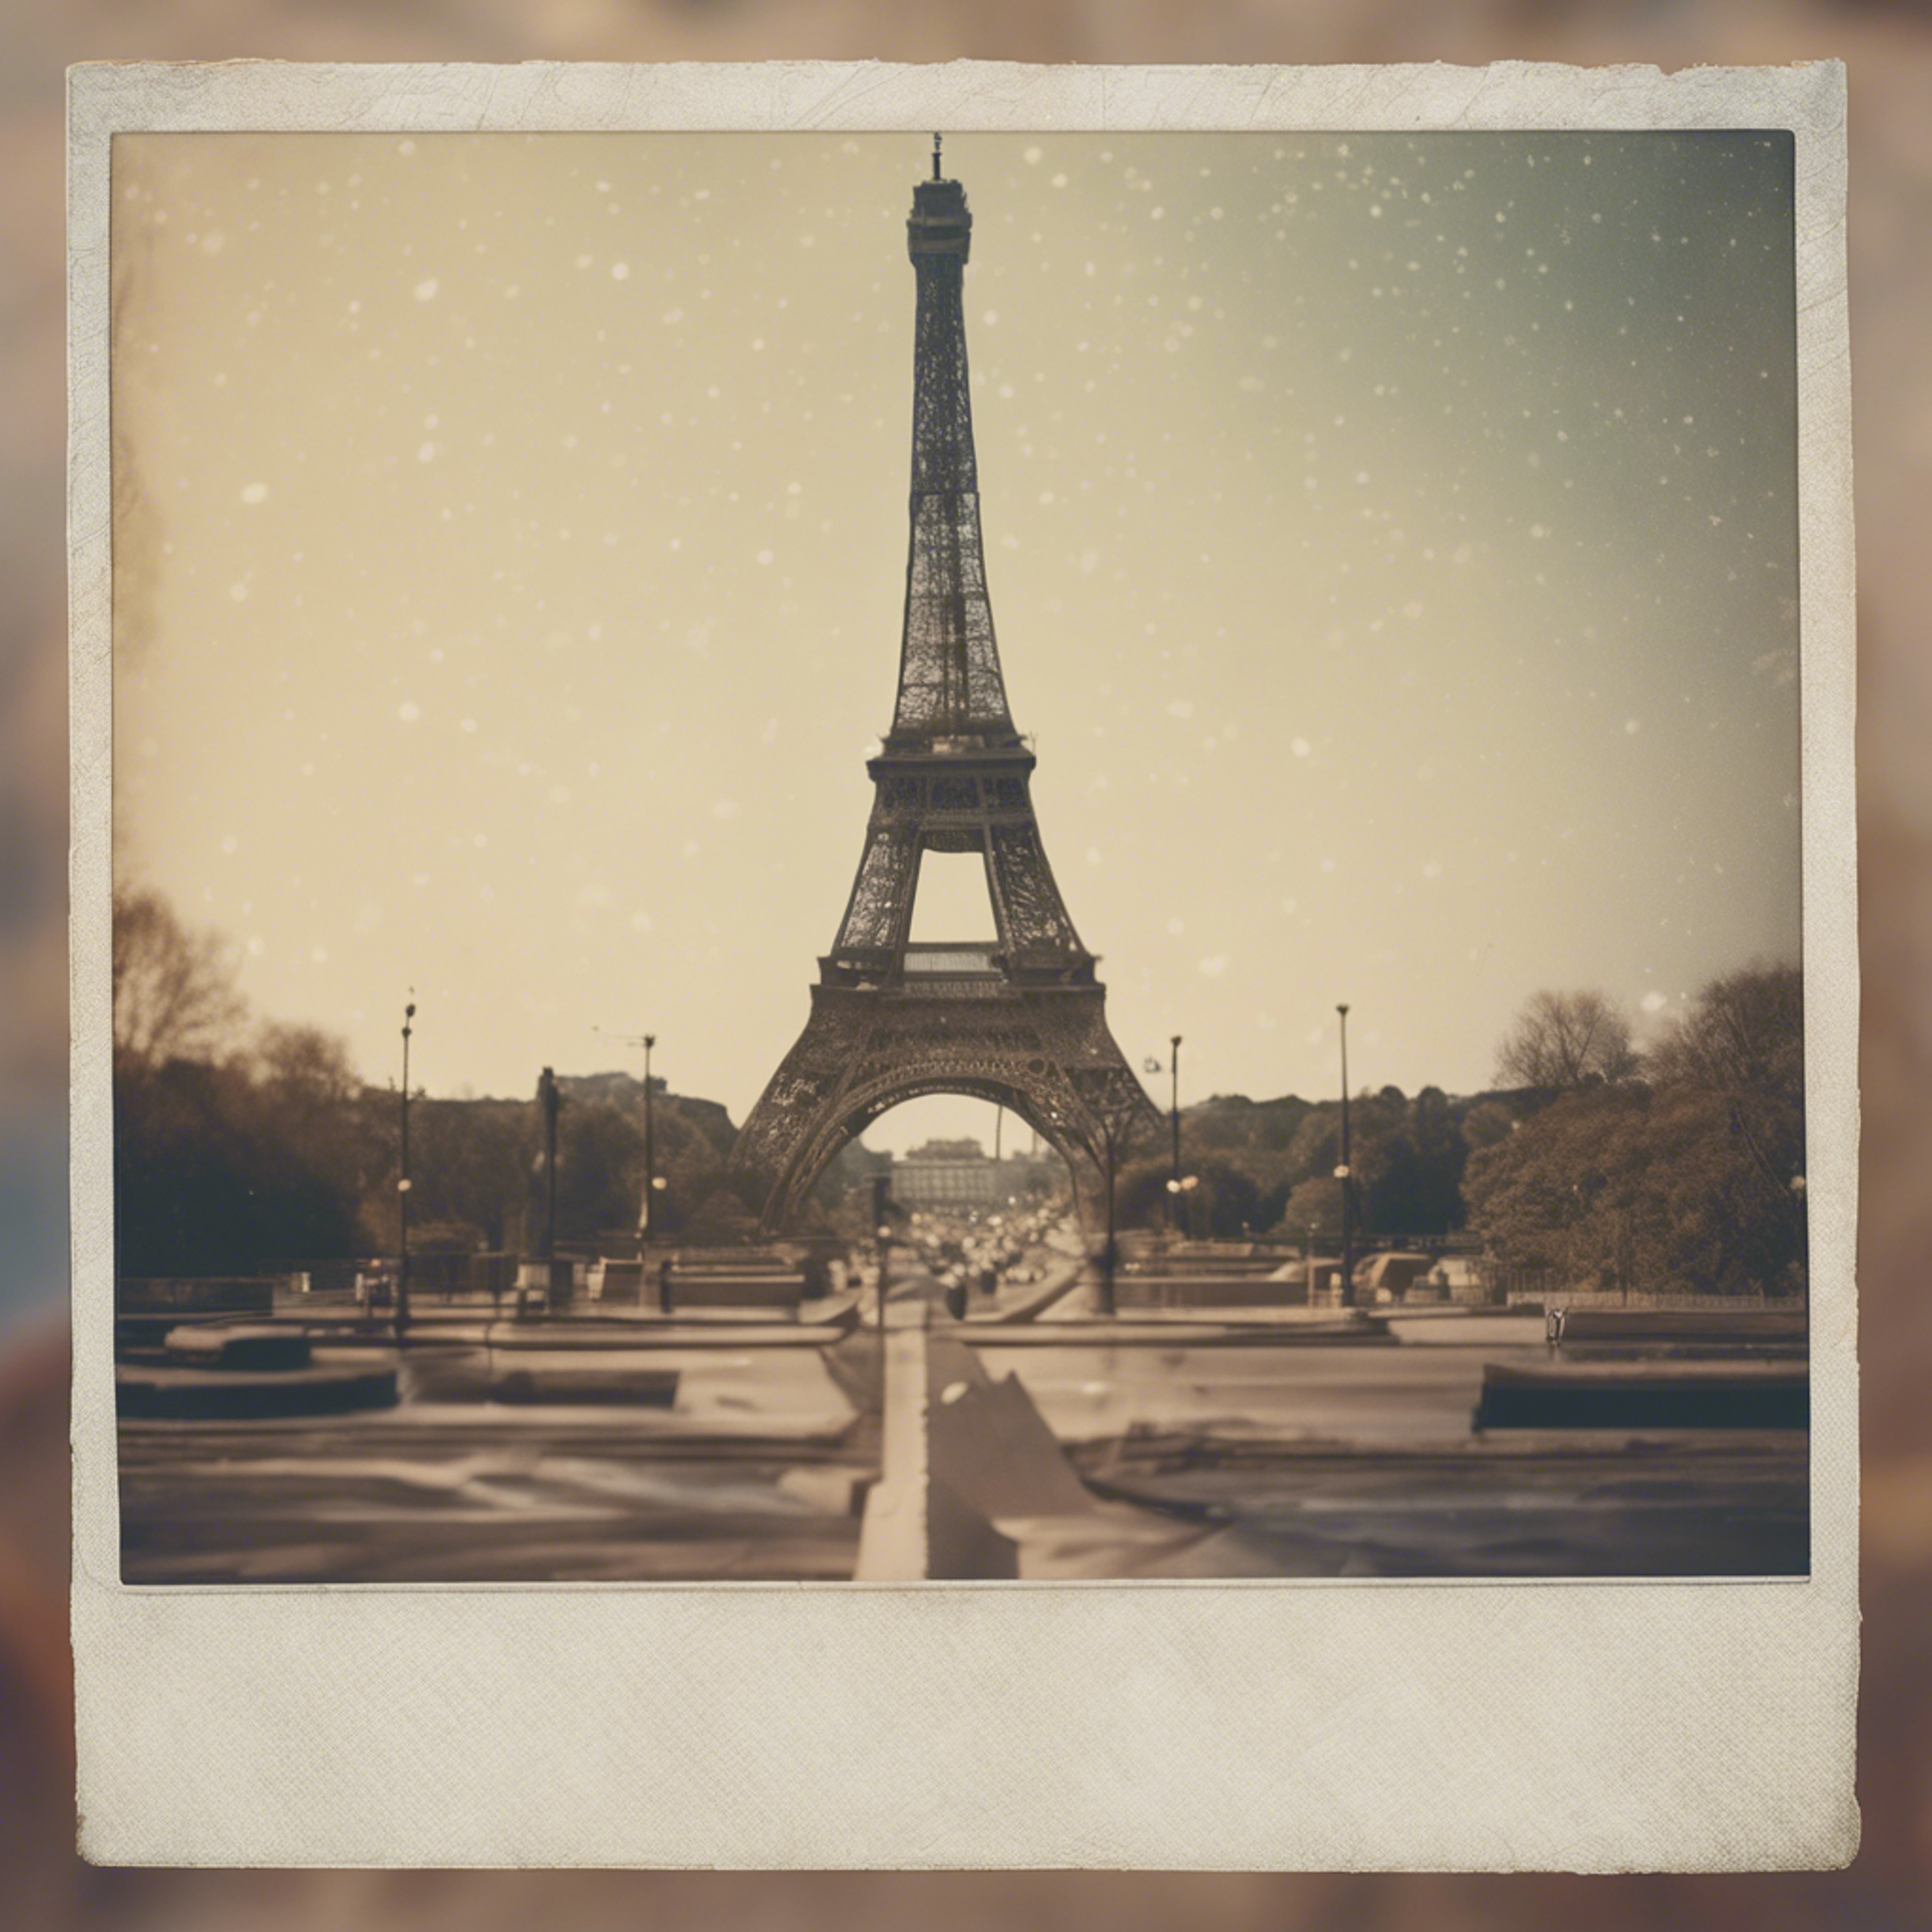 A faded beige Polaroid picture of an iconic landmark from the 70s. Tapeta[3ceb93f71d2c49b28cf4]